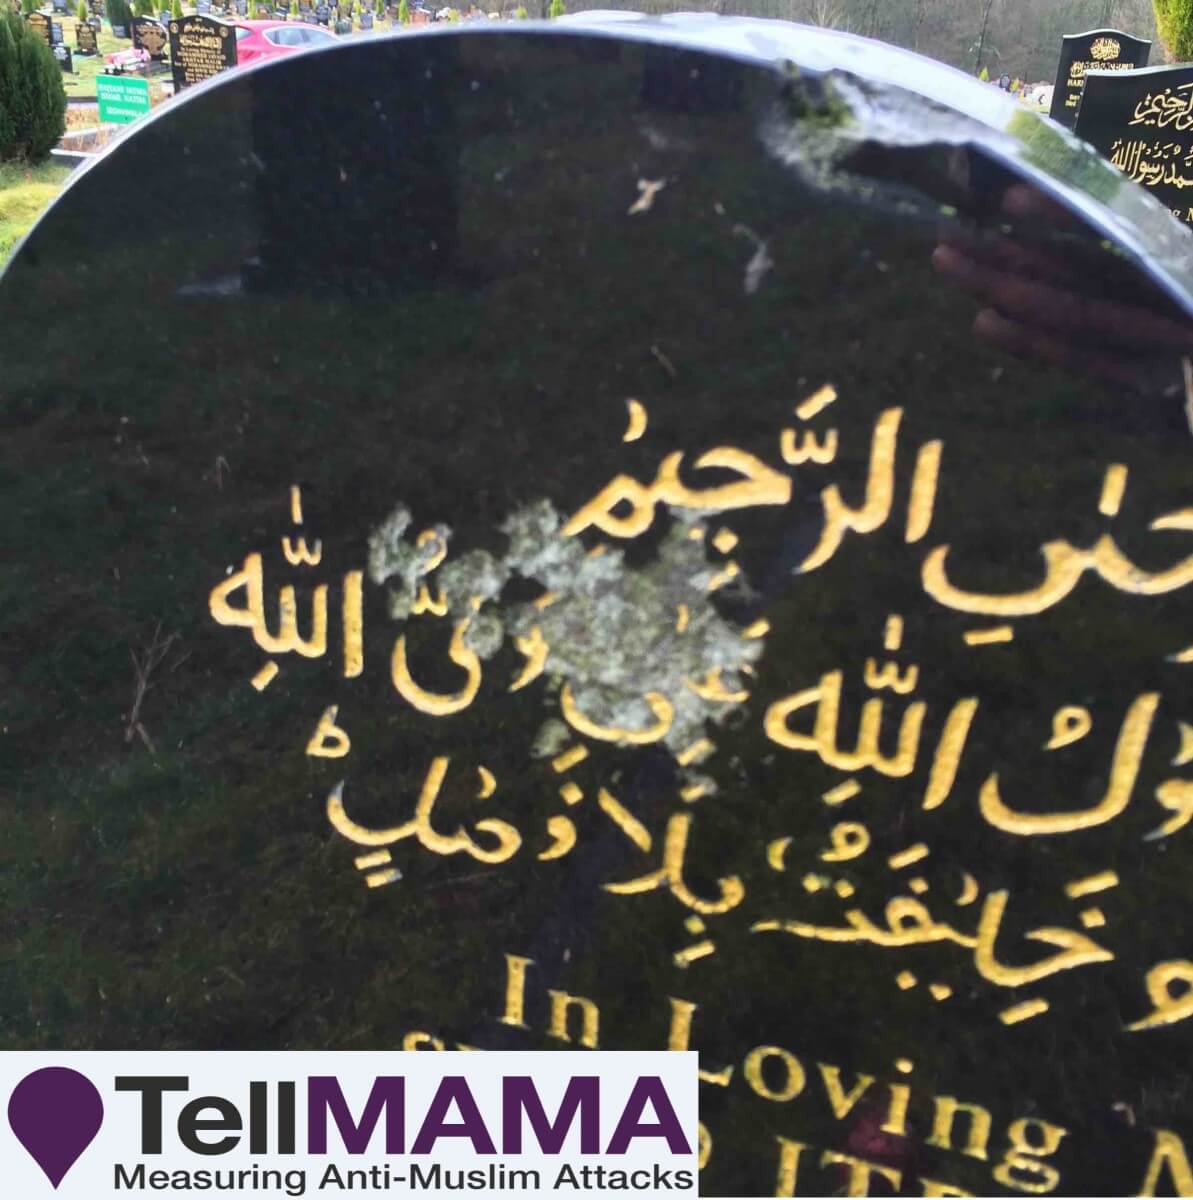 Sickening Shia Hatred in Blackburn Cemetery – A Sign of Sectarian Extremism